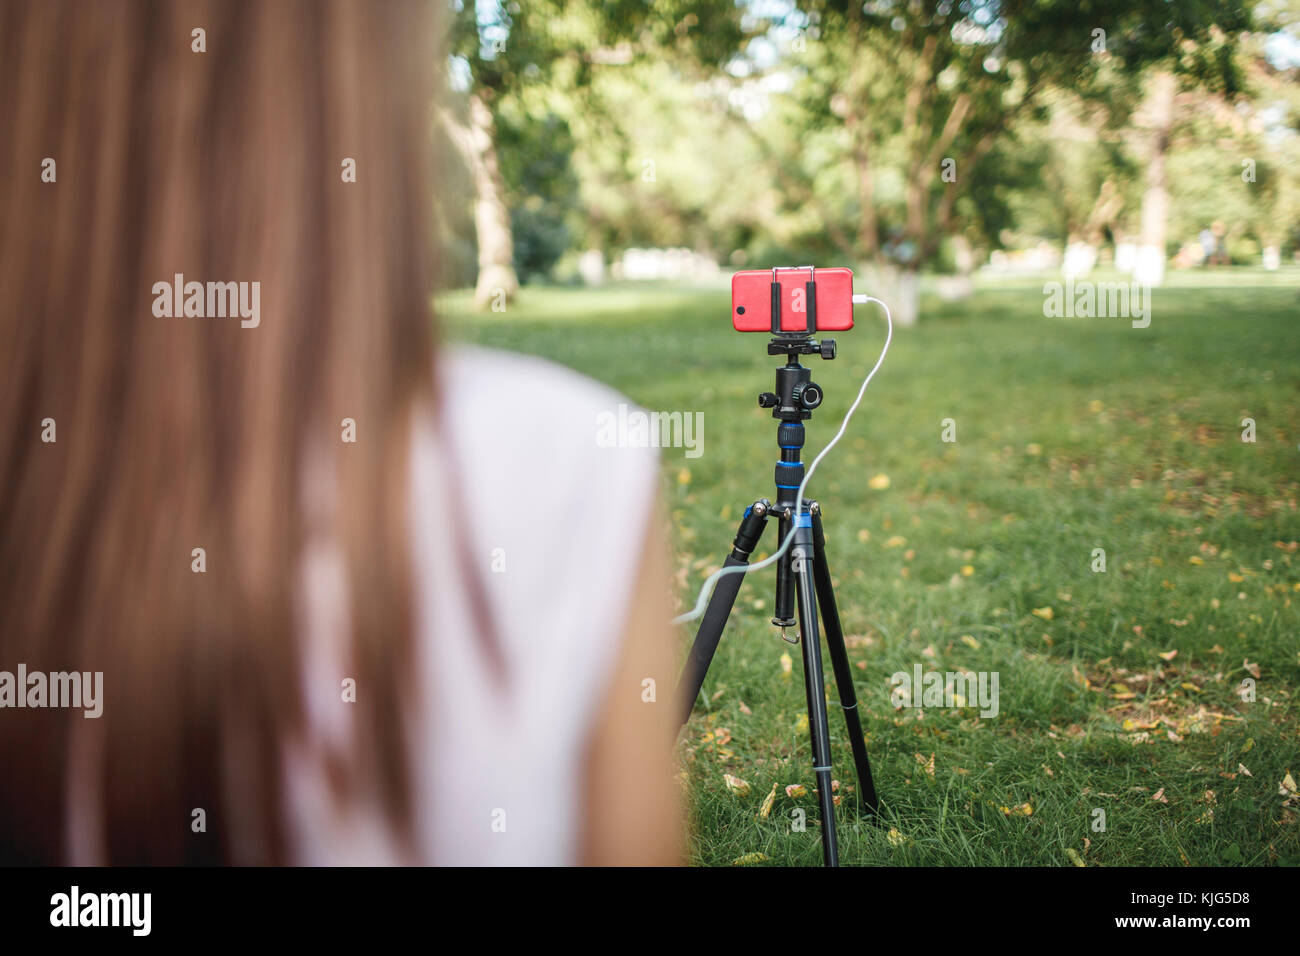 Woman working with camera phone on tripod on a meadow Stock Photo